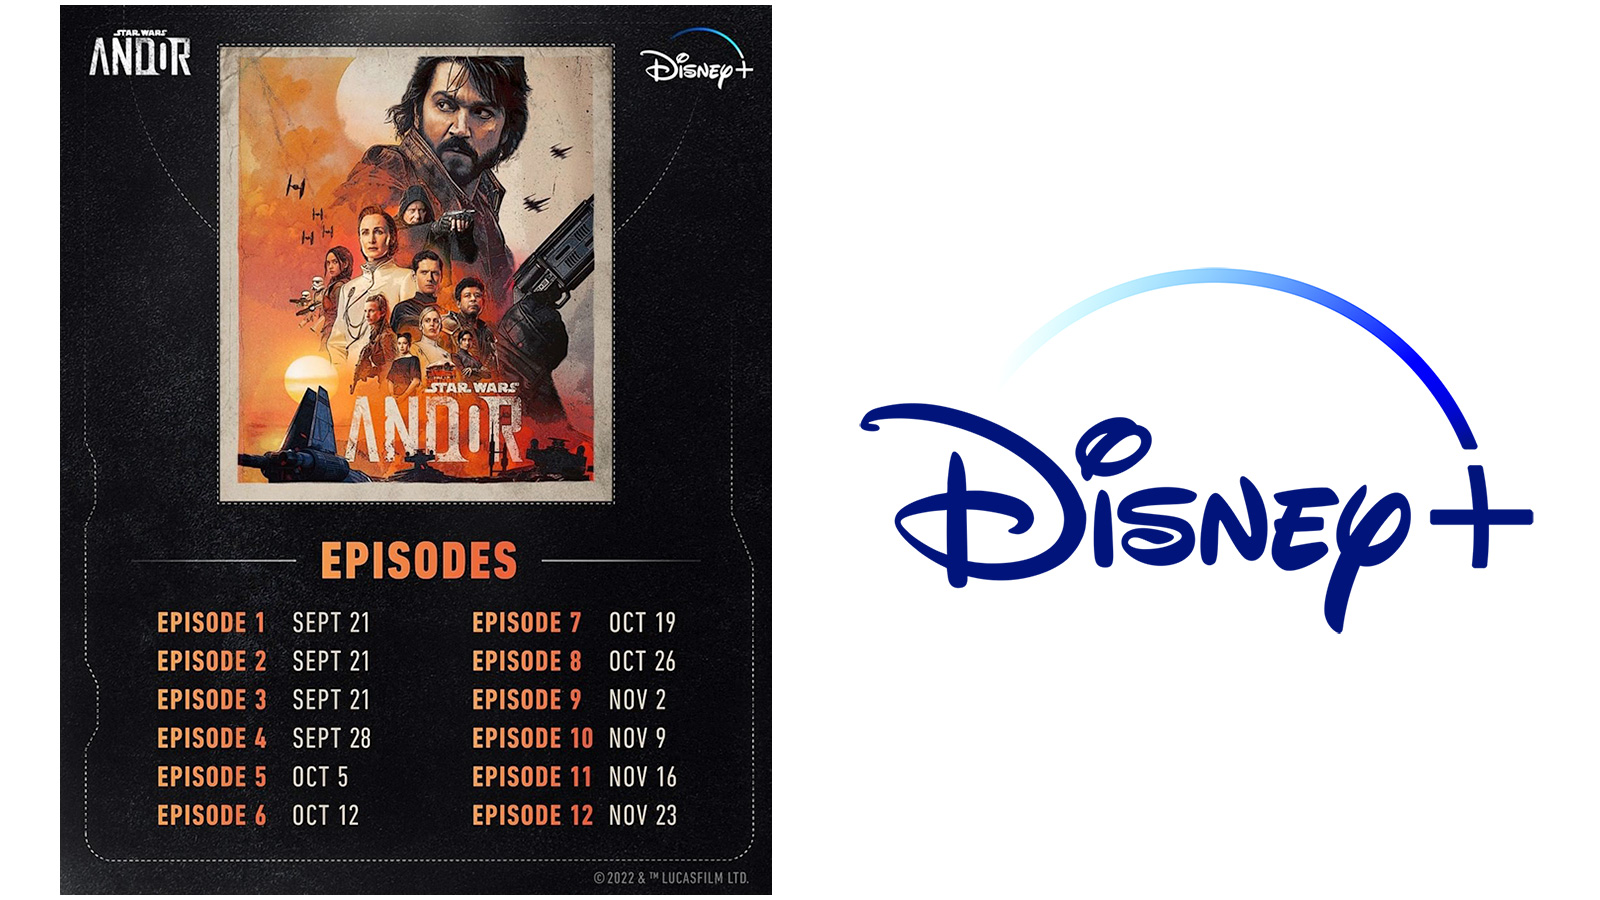 Release Dates For All 12 Episodes Of The Disney+ Star Wars Andor Series